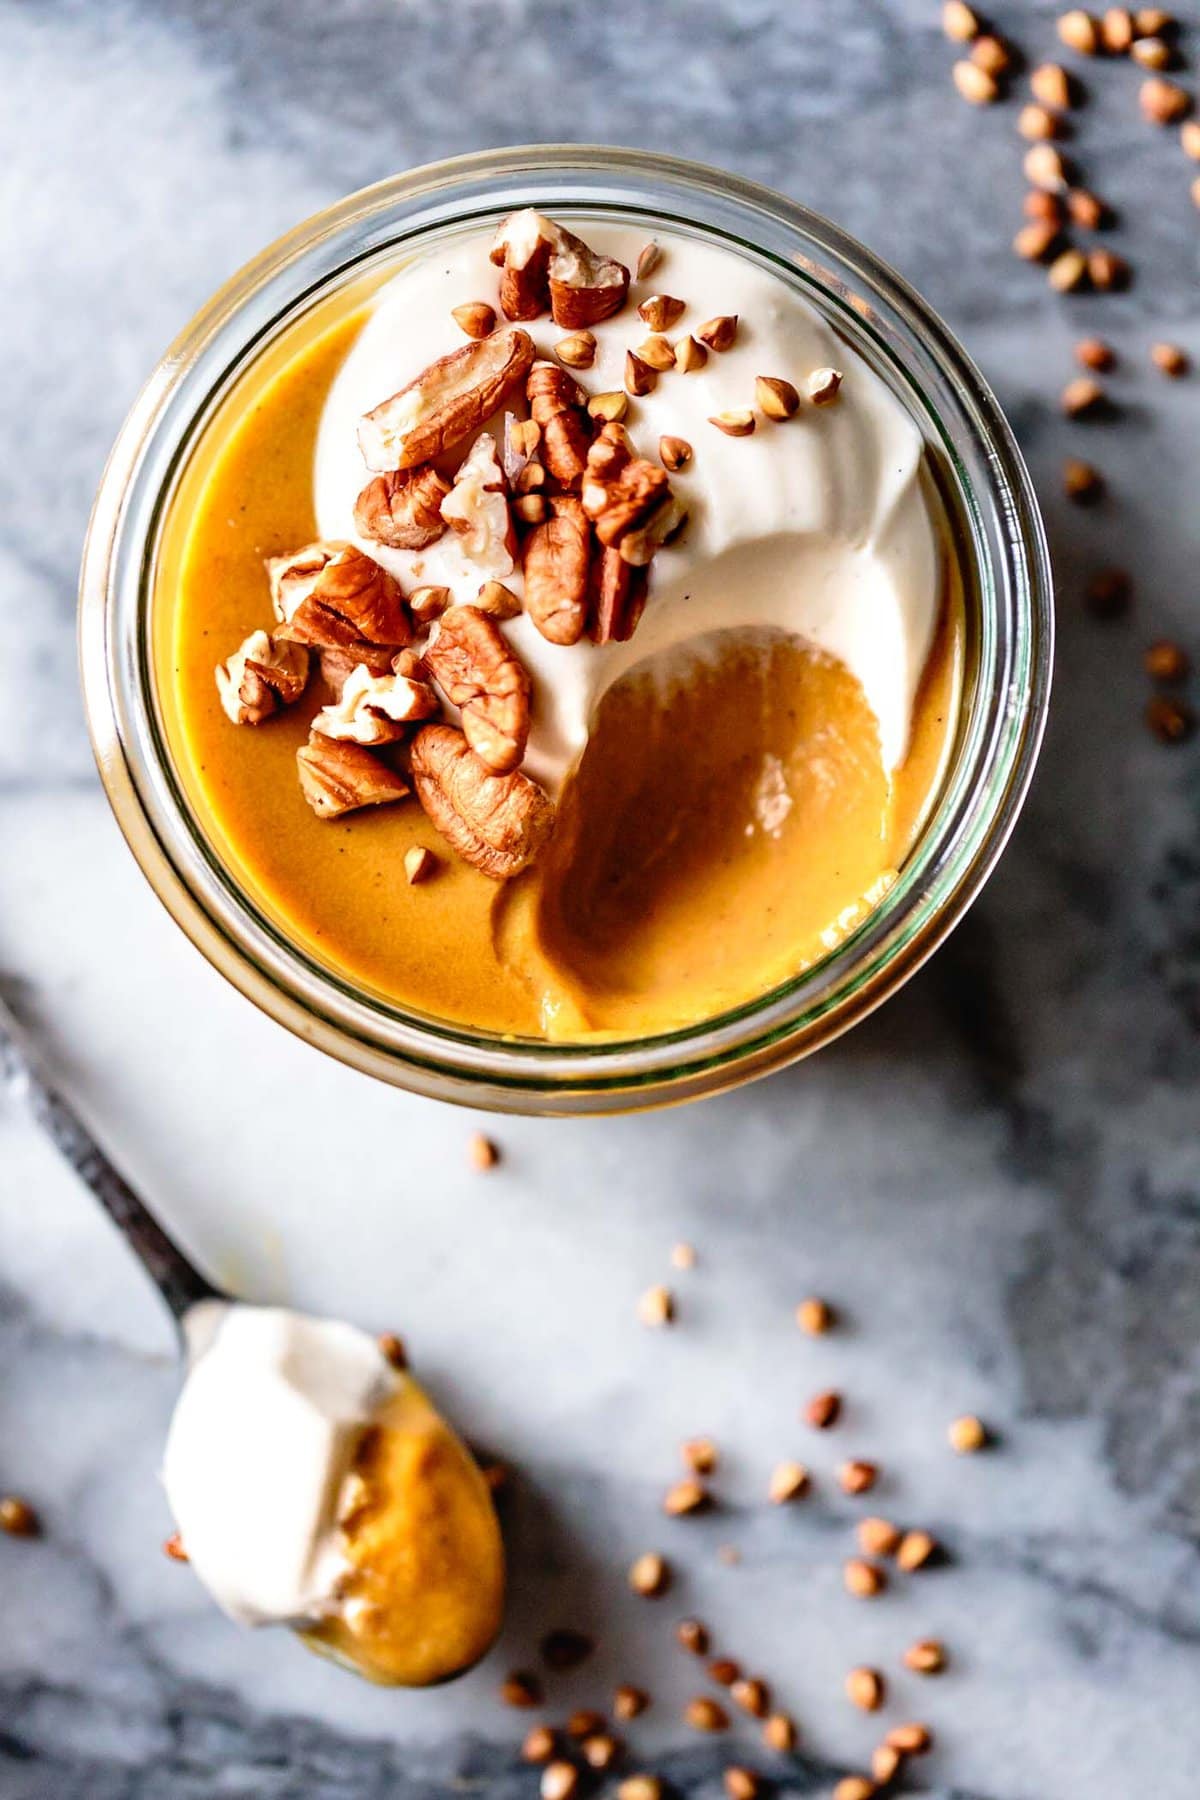 A sexy closeup shot of pumpkin pudding in a jar with a bite taken out revealing its creamy, luscious texture. Yorm!